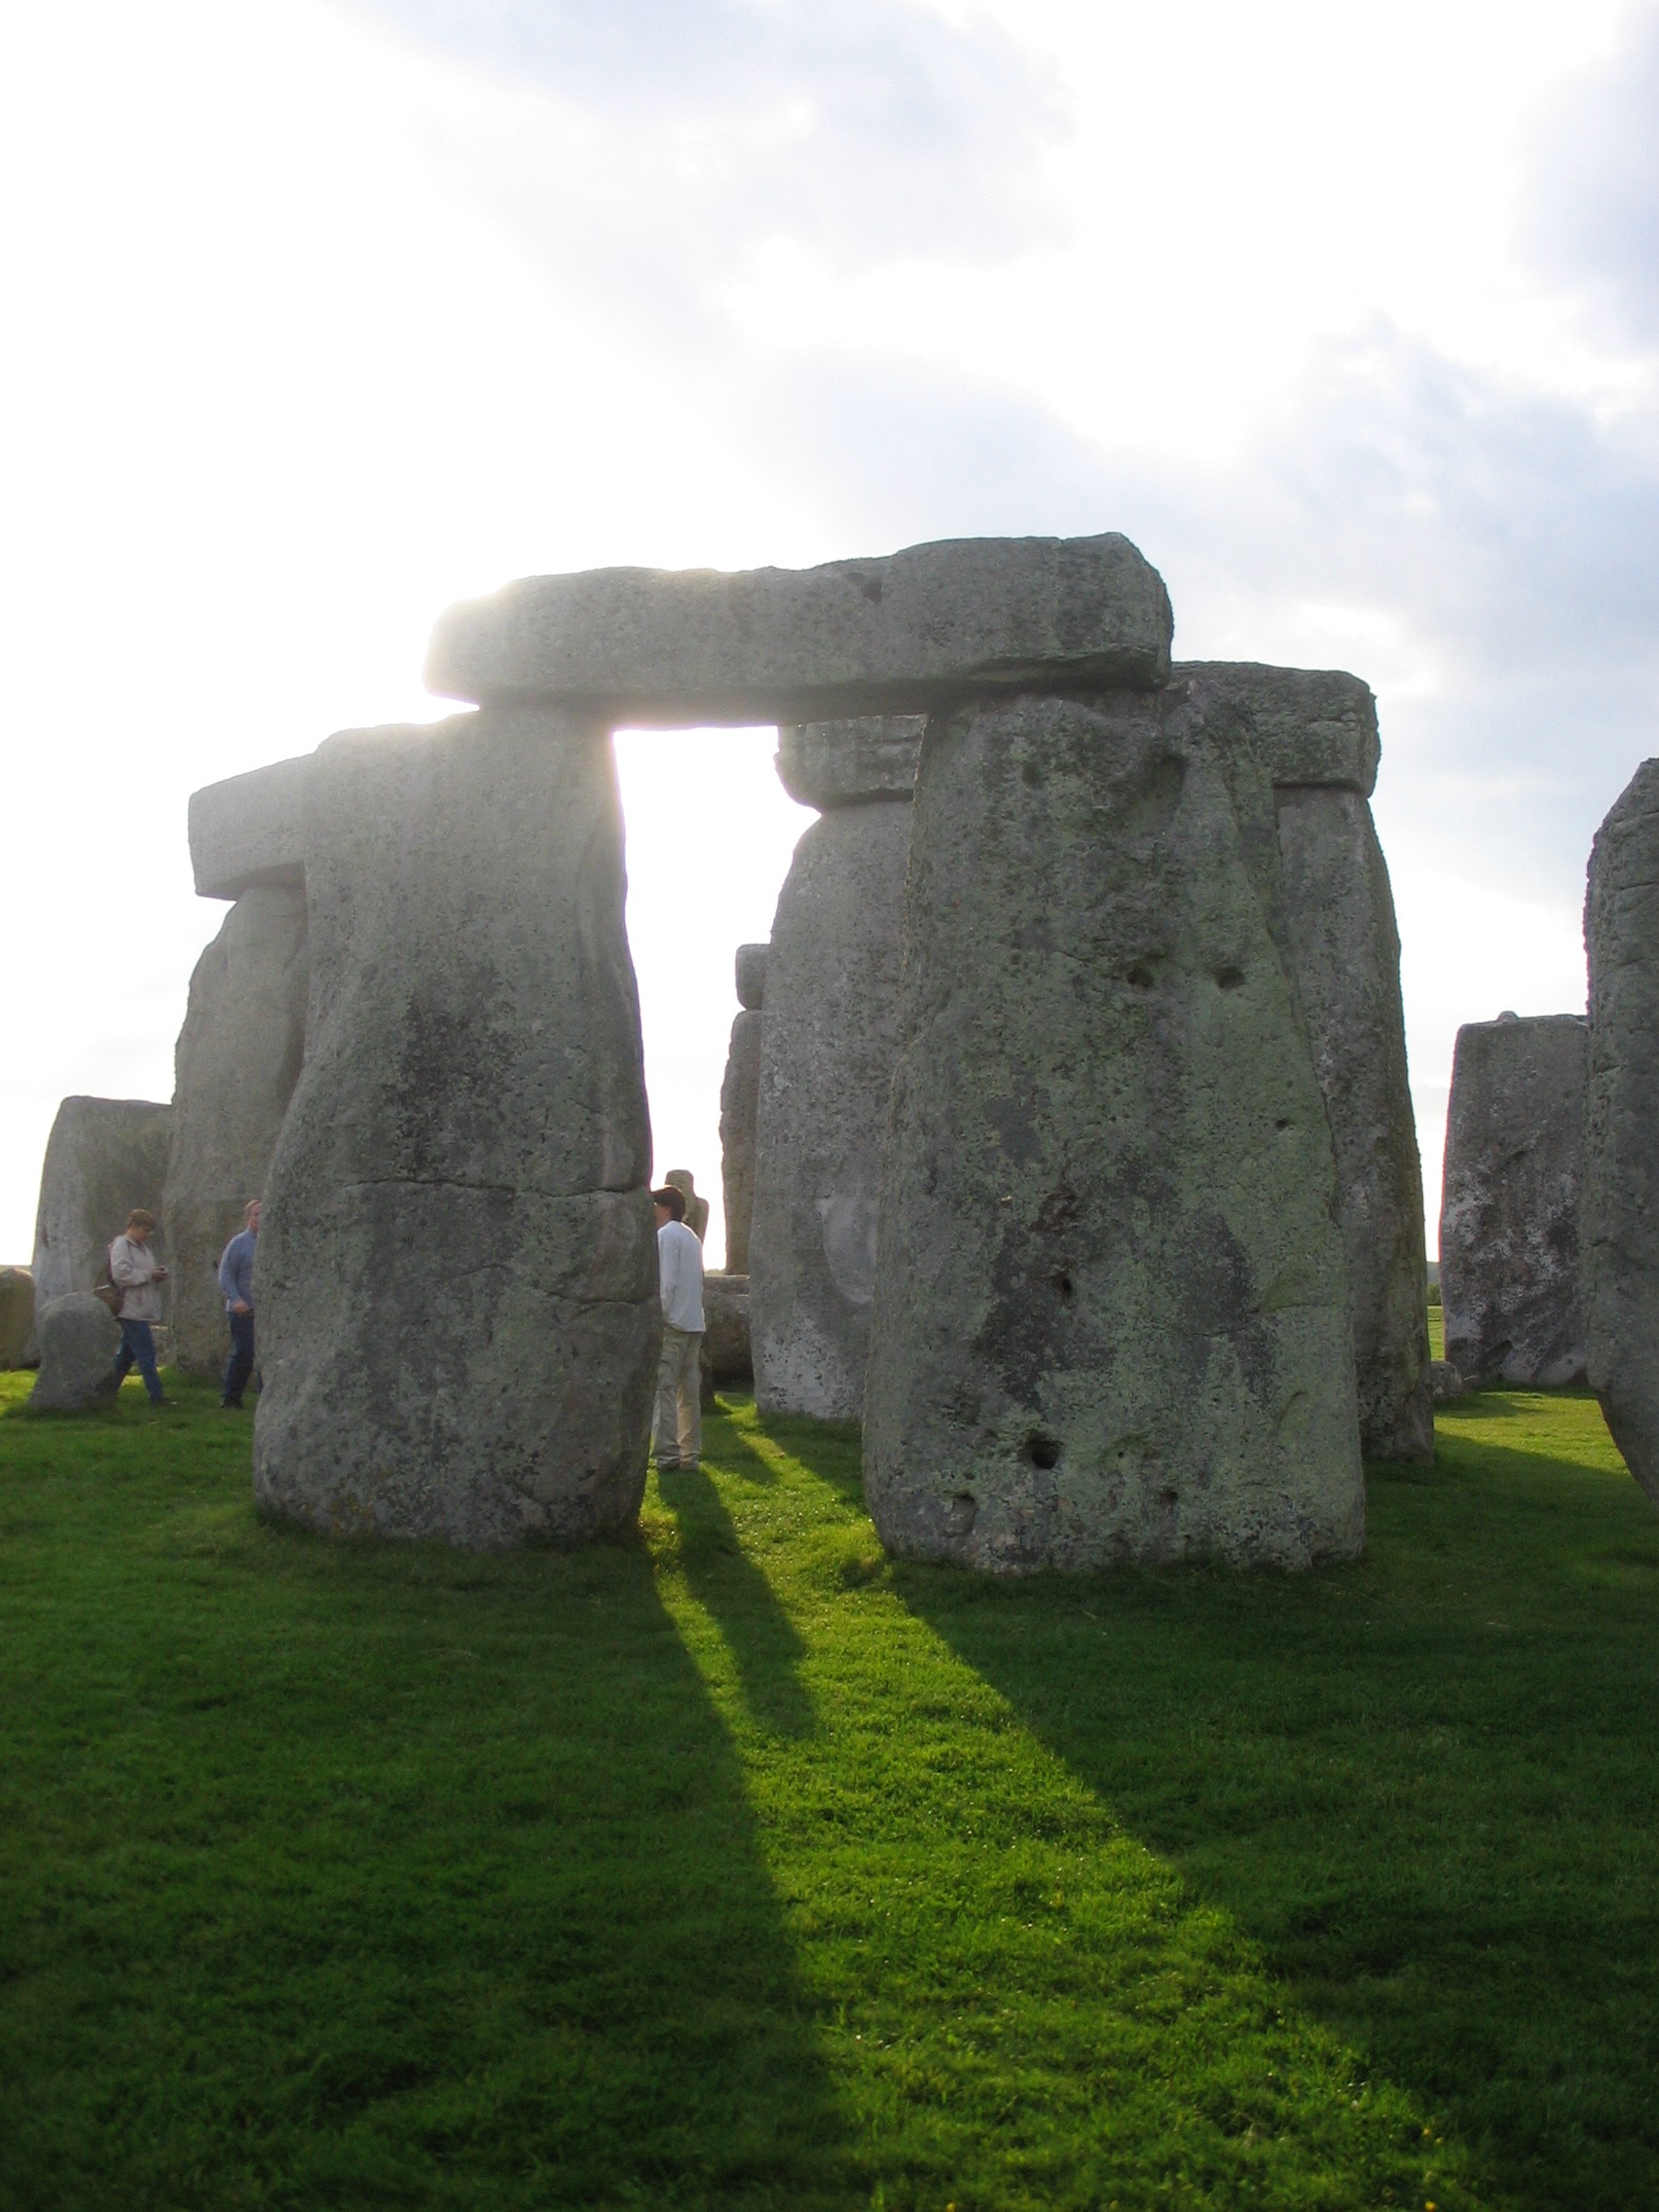 people standing in a grassy area with large rocks with Stonehenge in the background